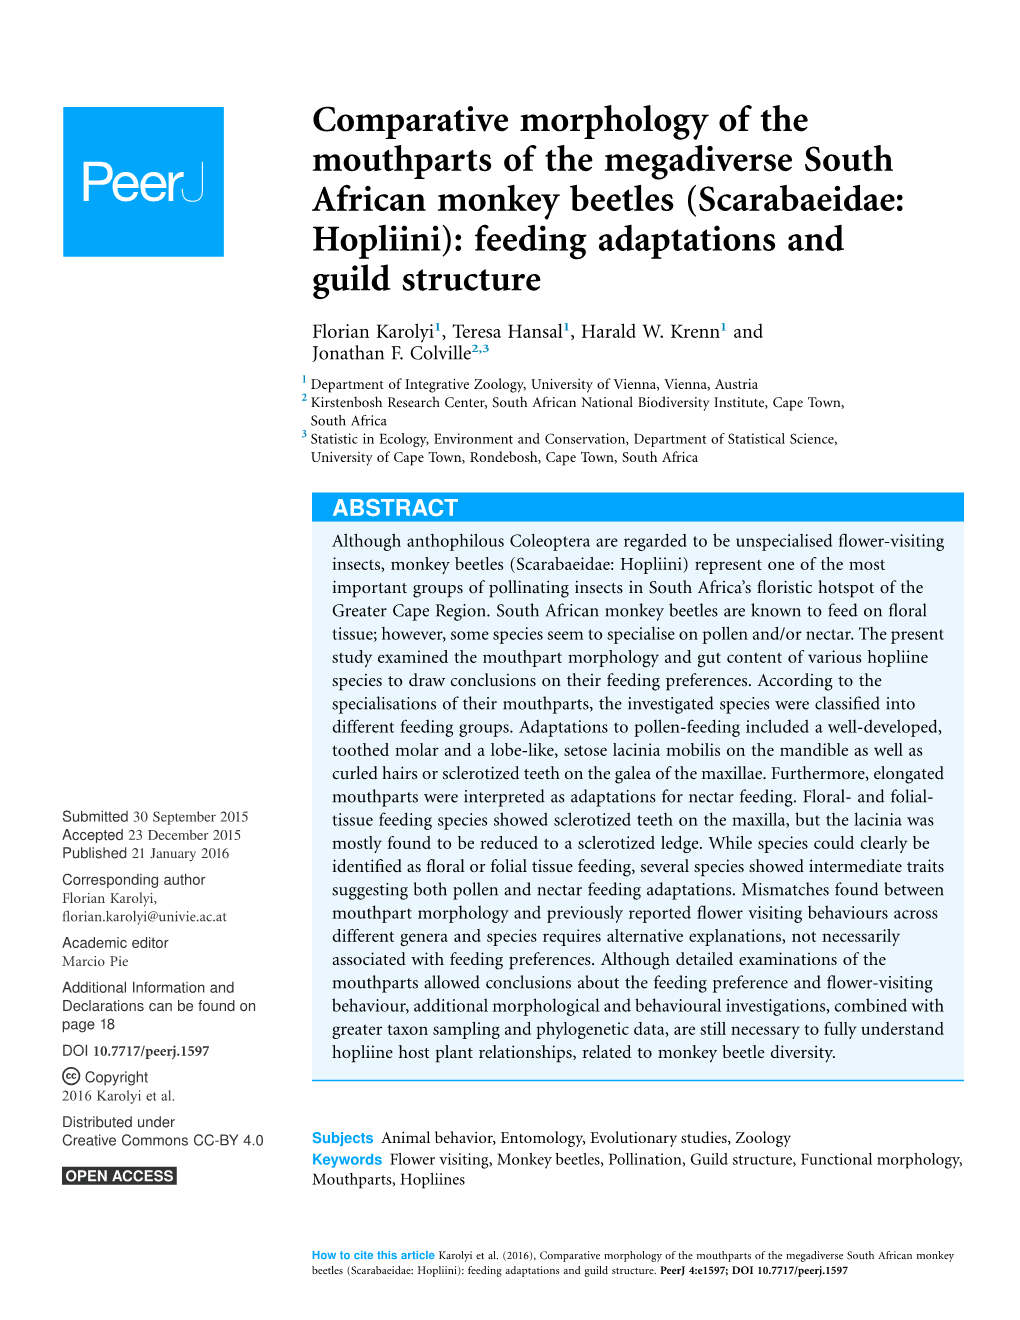 Comparative Morphology of the Mouthparts of the Megadiverse South African Monkey Beetles (Scarabaeidae: Hopliini): Feeding Adaptations and Guild Structure